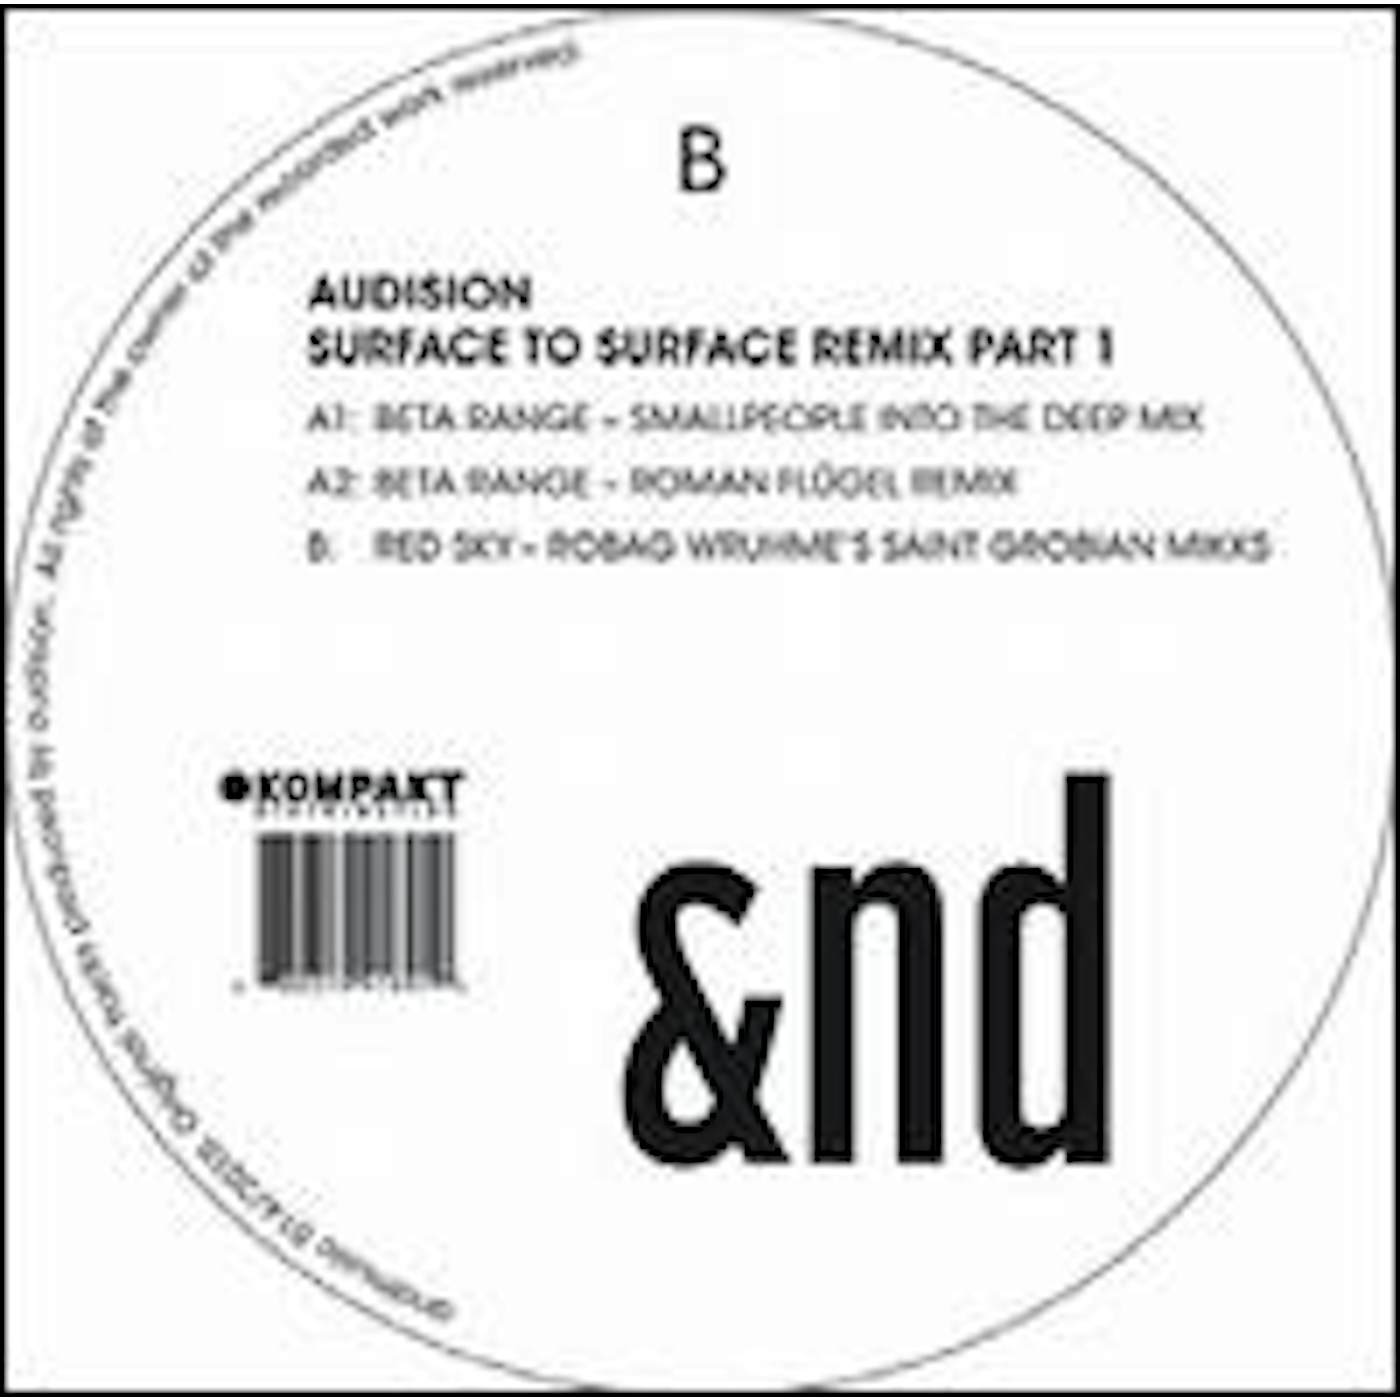 Audision SURFACE TO SURFACE REMIX 1 Vinyl Record